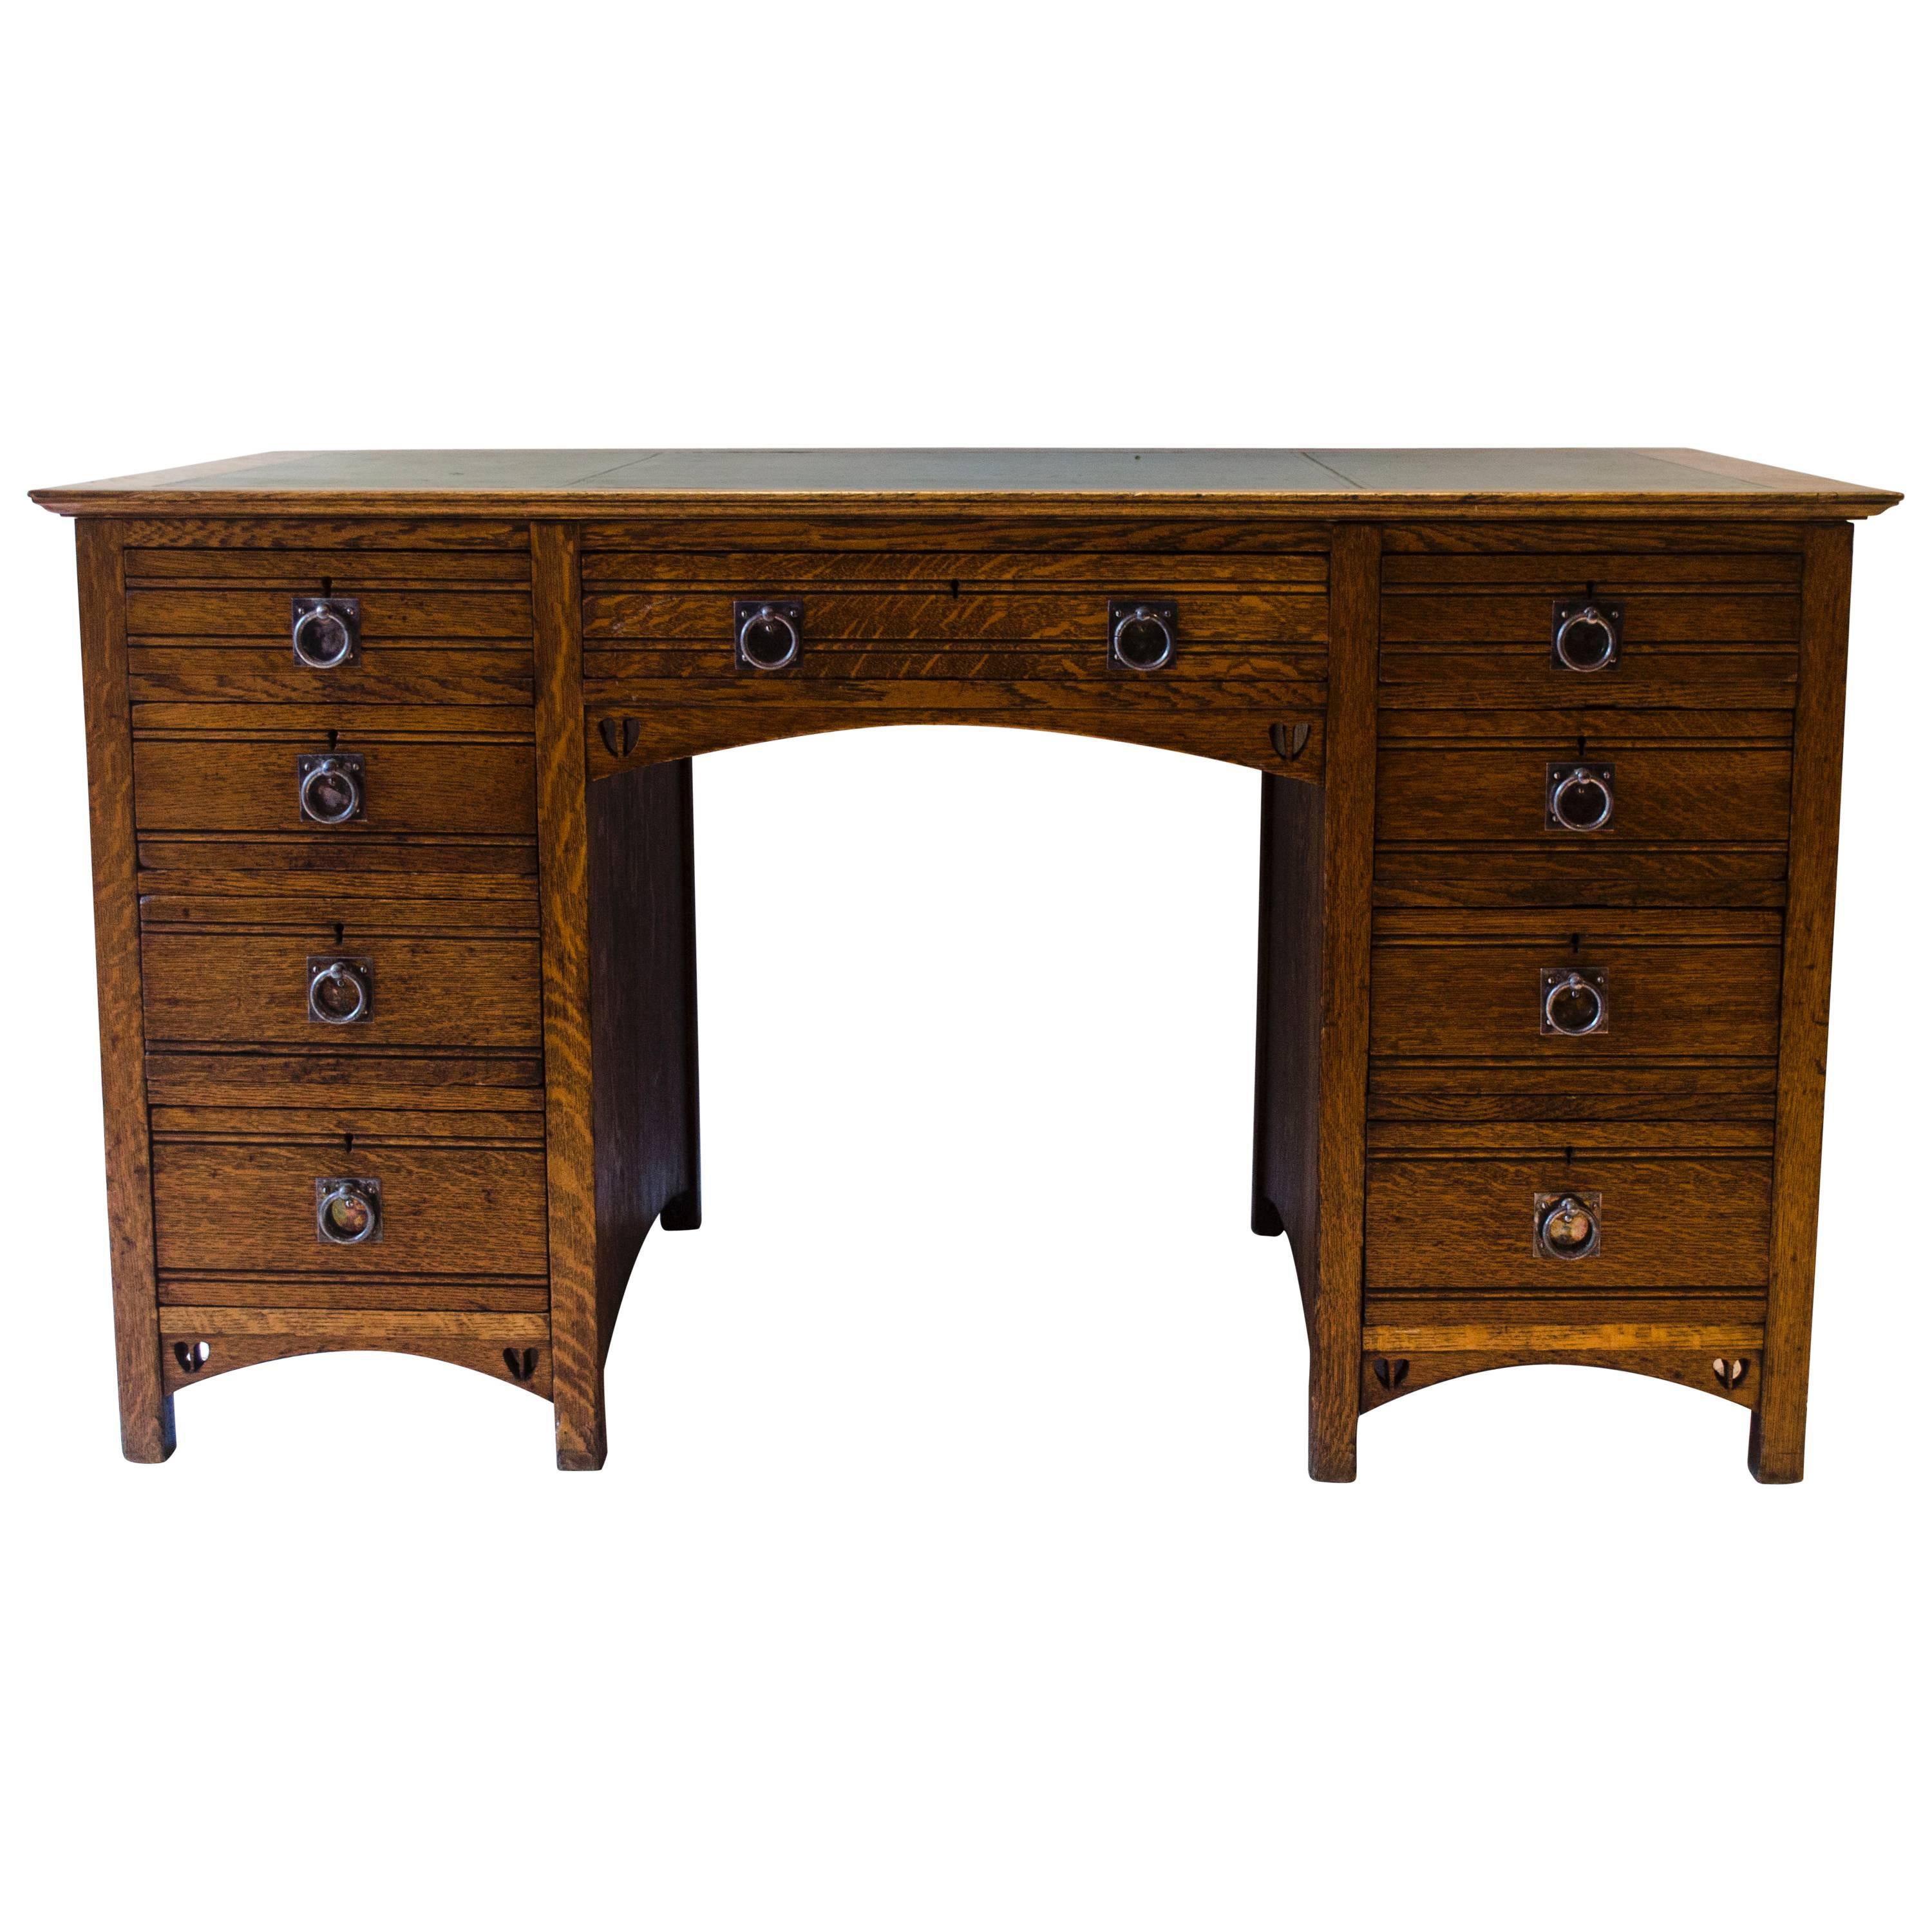 E A Taylor for Wylie & Lochhead Arts & Crafts Oak Desk with Twin Heart Details